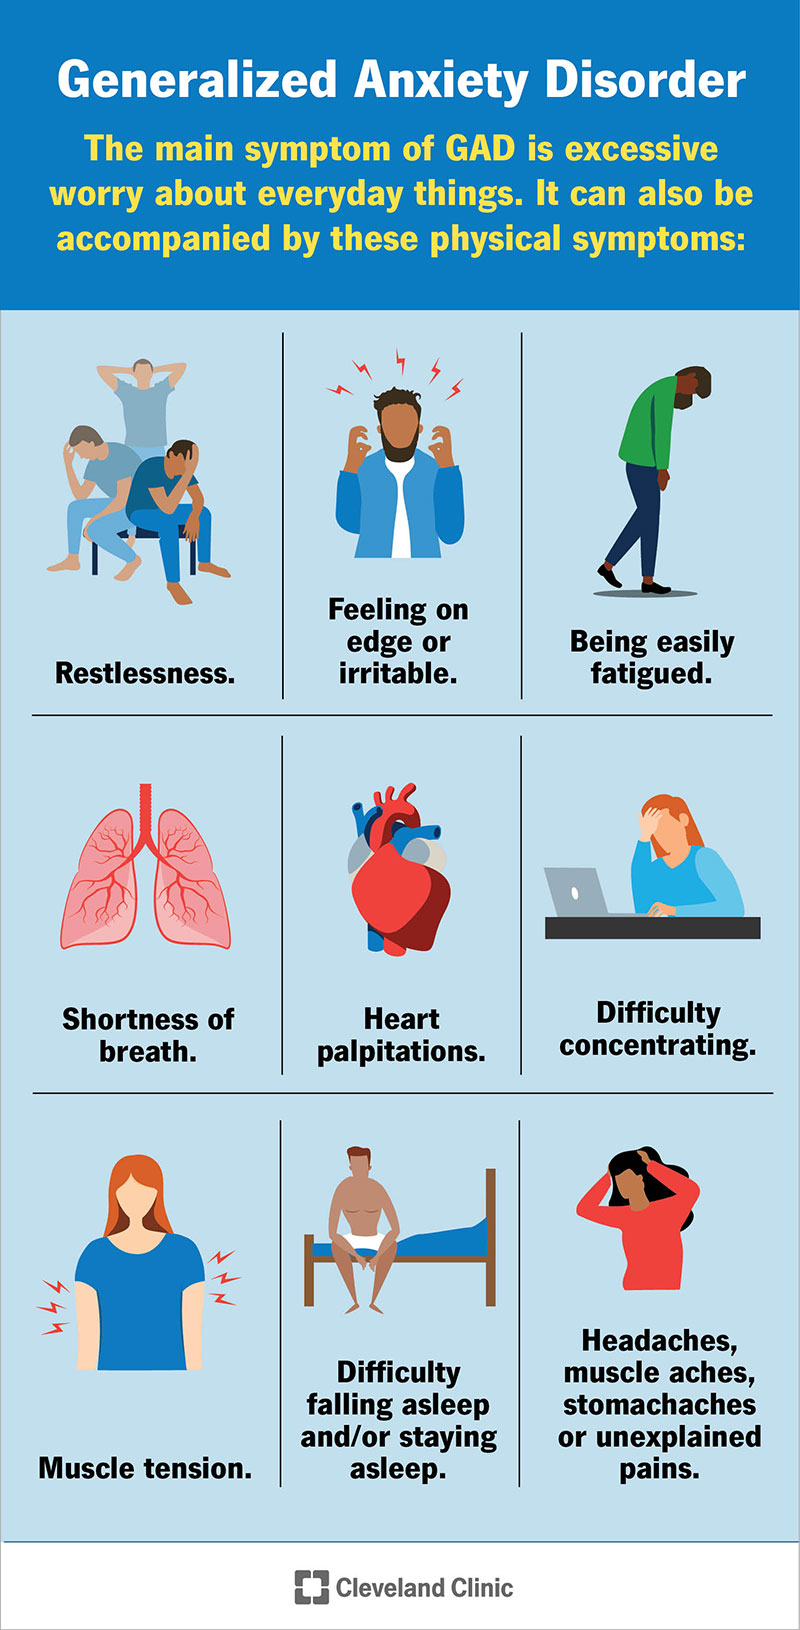 Physical symptoms of GAD can include restlessness, feeling on edge, heart palpitations, shortness of breath and more.